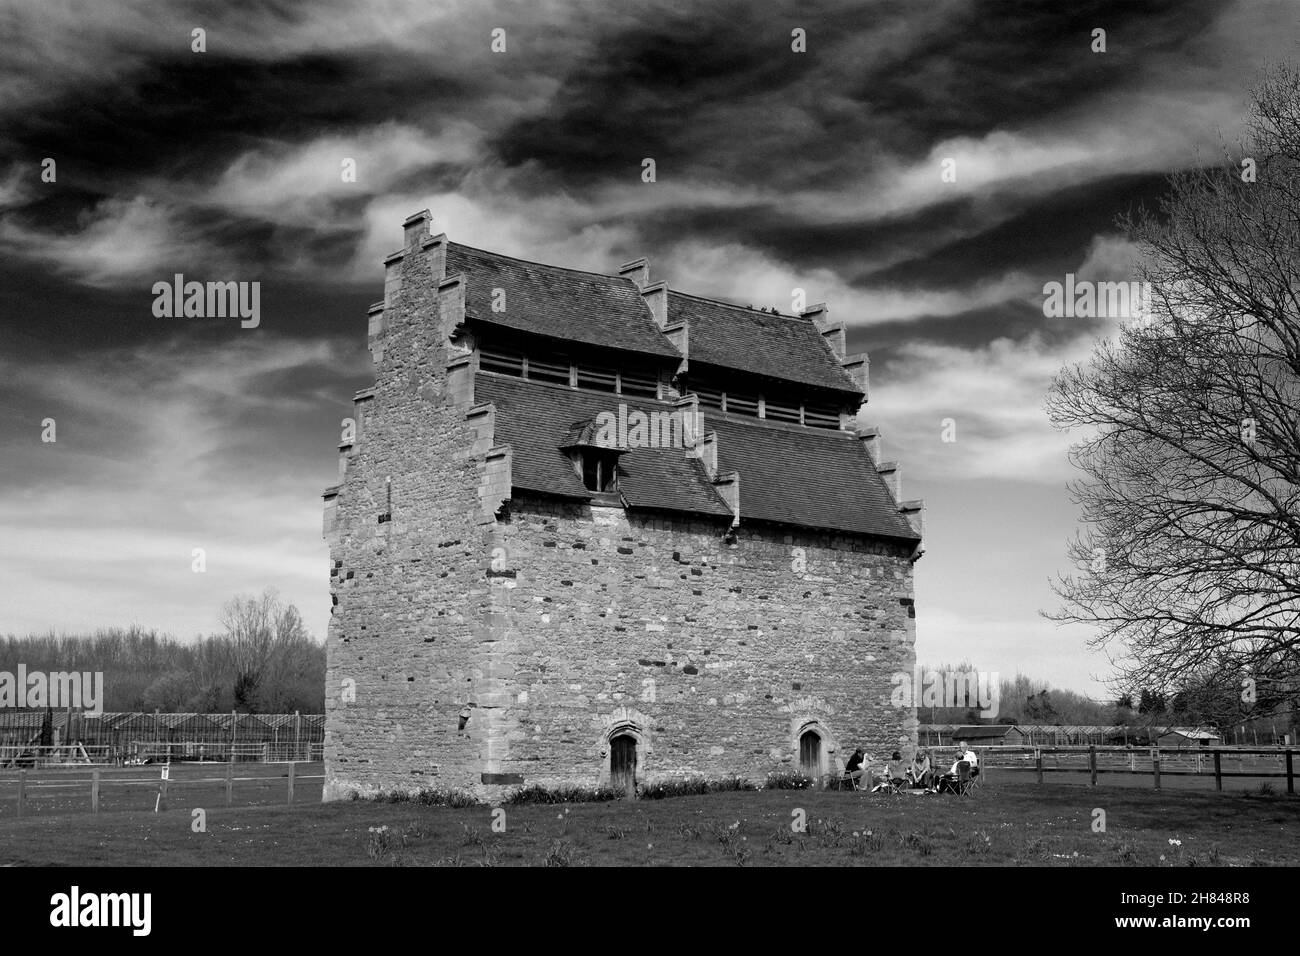 The Willington Dovecote and Stables, Willington village, Bedfordshire, England. Stock Photo